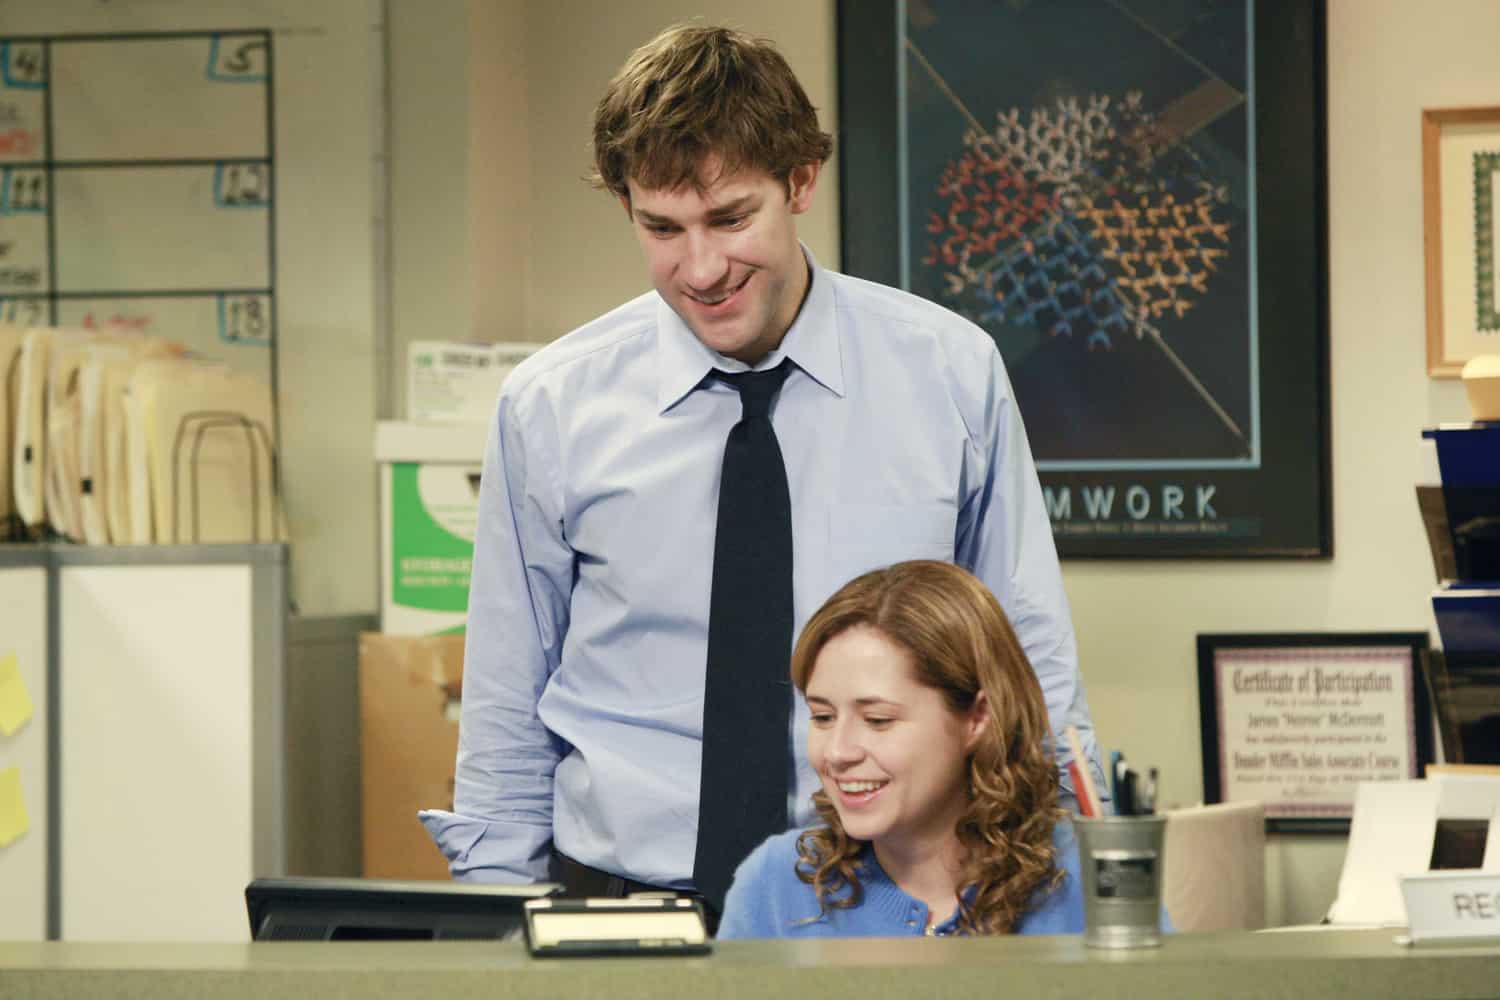 A businessman and a receptionist laugh at a computer together in this image from Peacock.